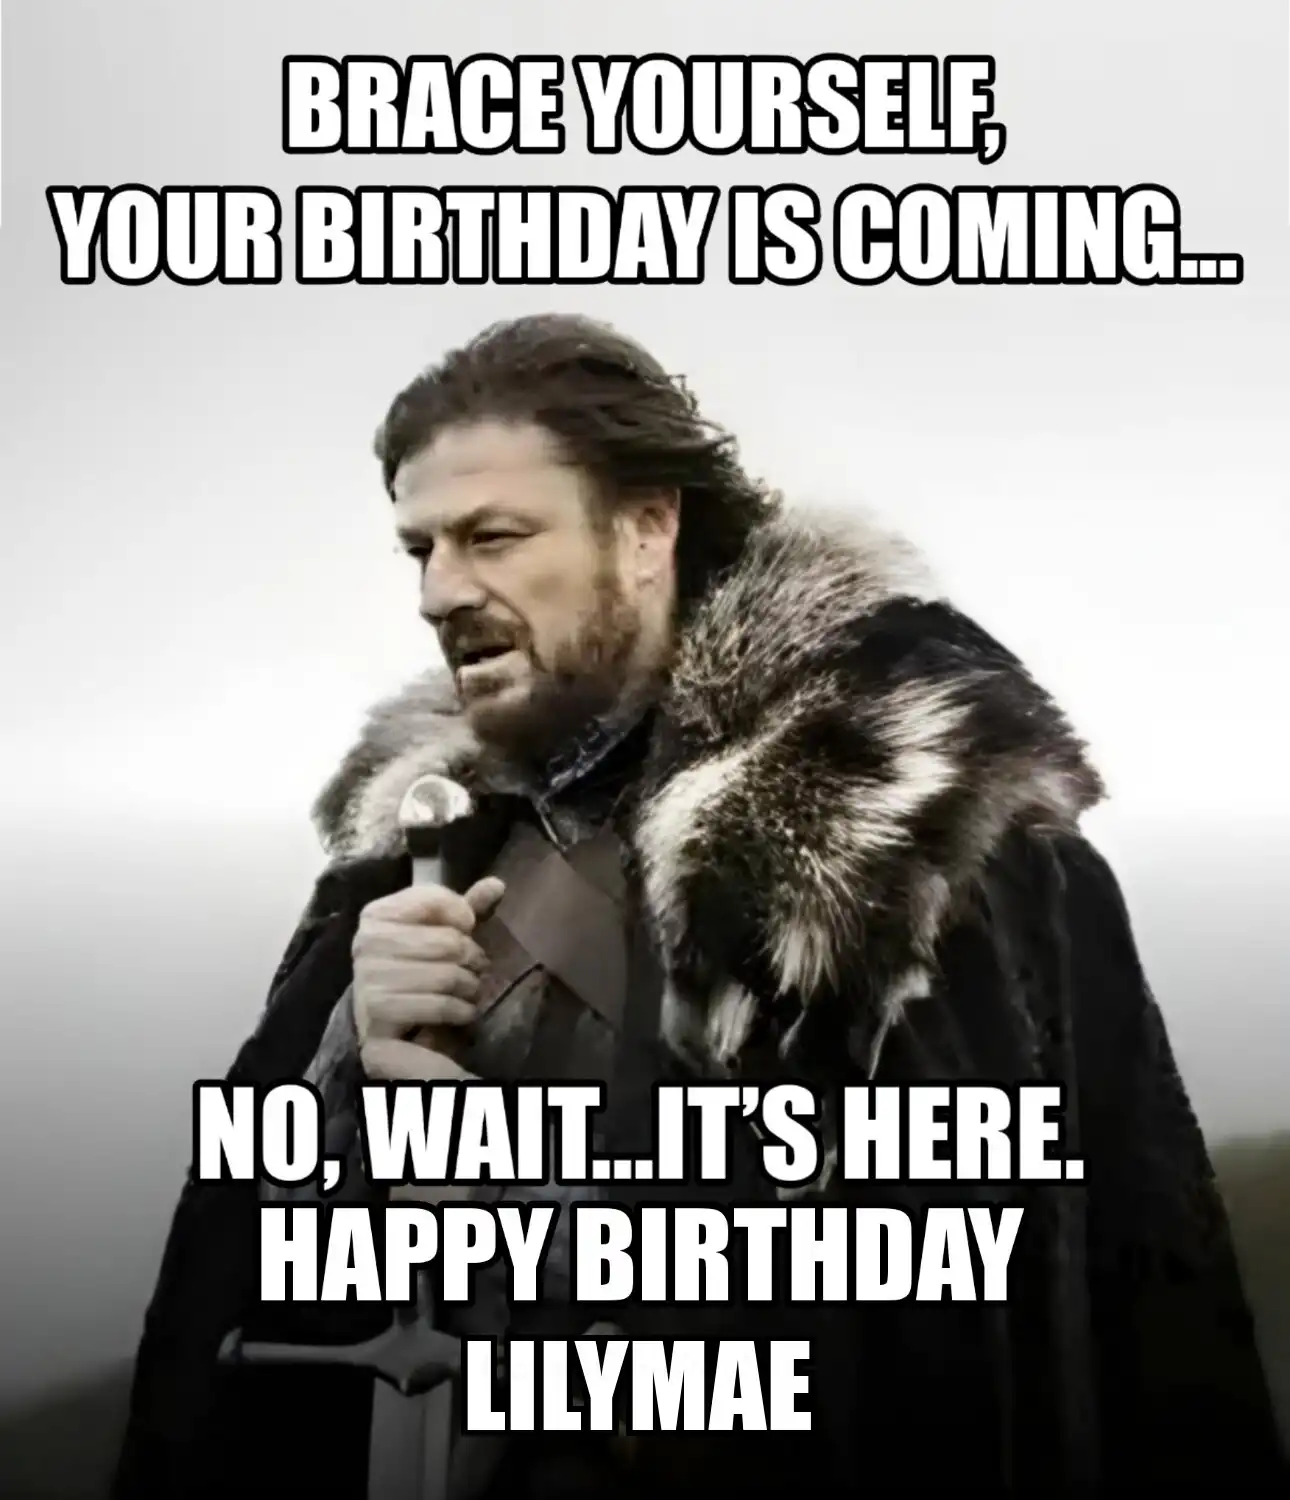 Happy Birthday Lilymae Brace Yourself Your Birthday Is Coming Meme